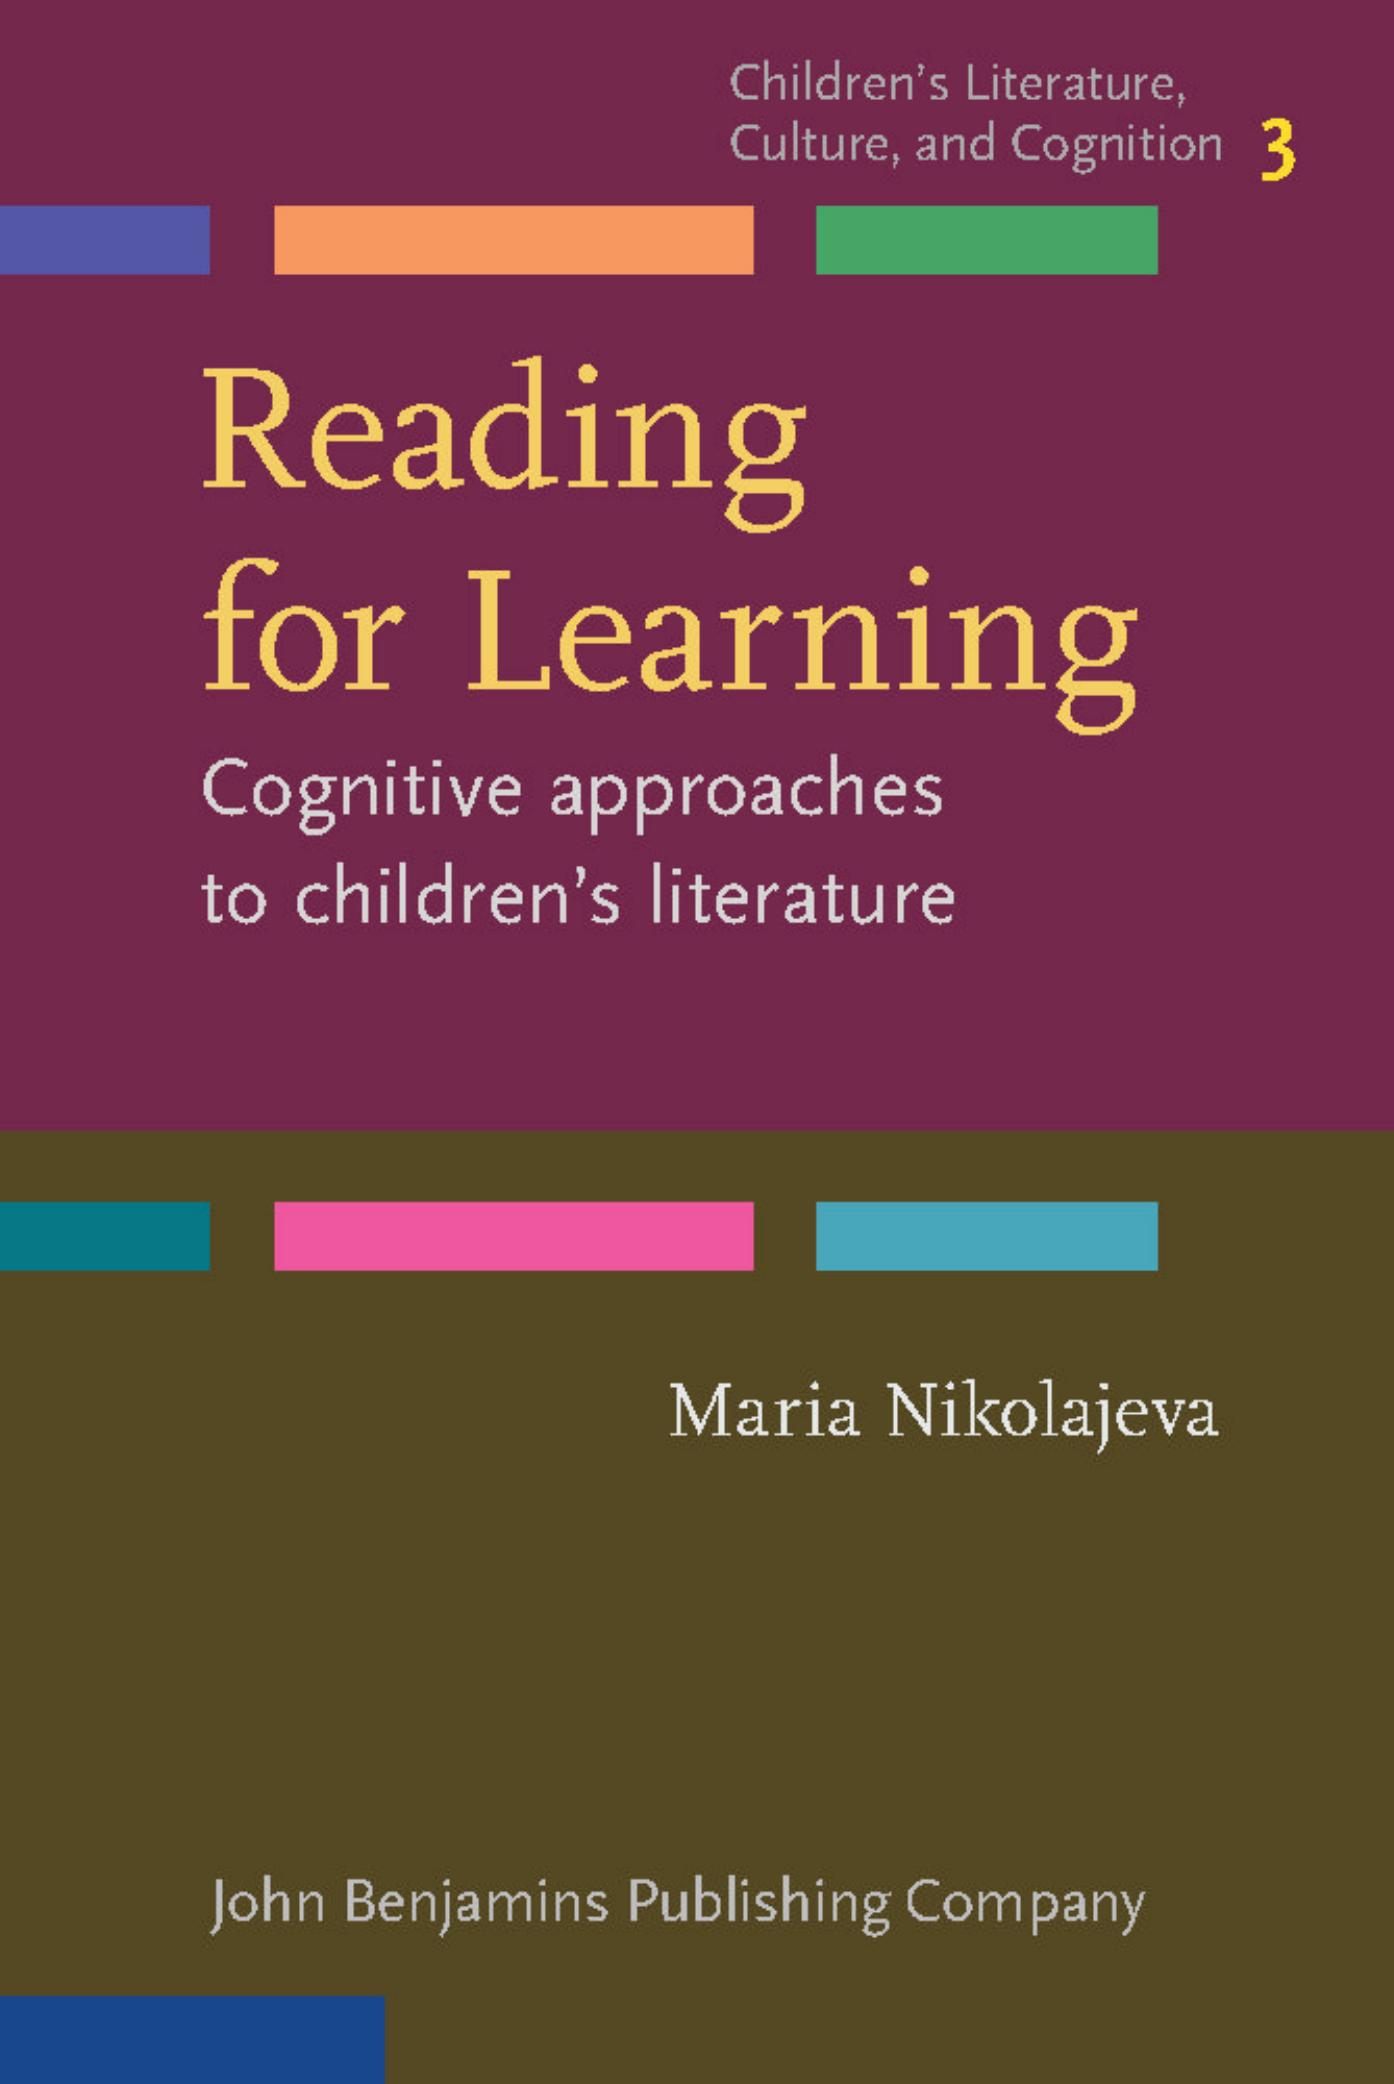 Reading for Learning: Cognitive Approaches to Children's Literature